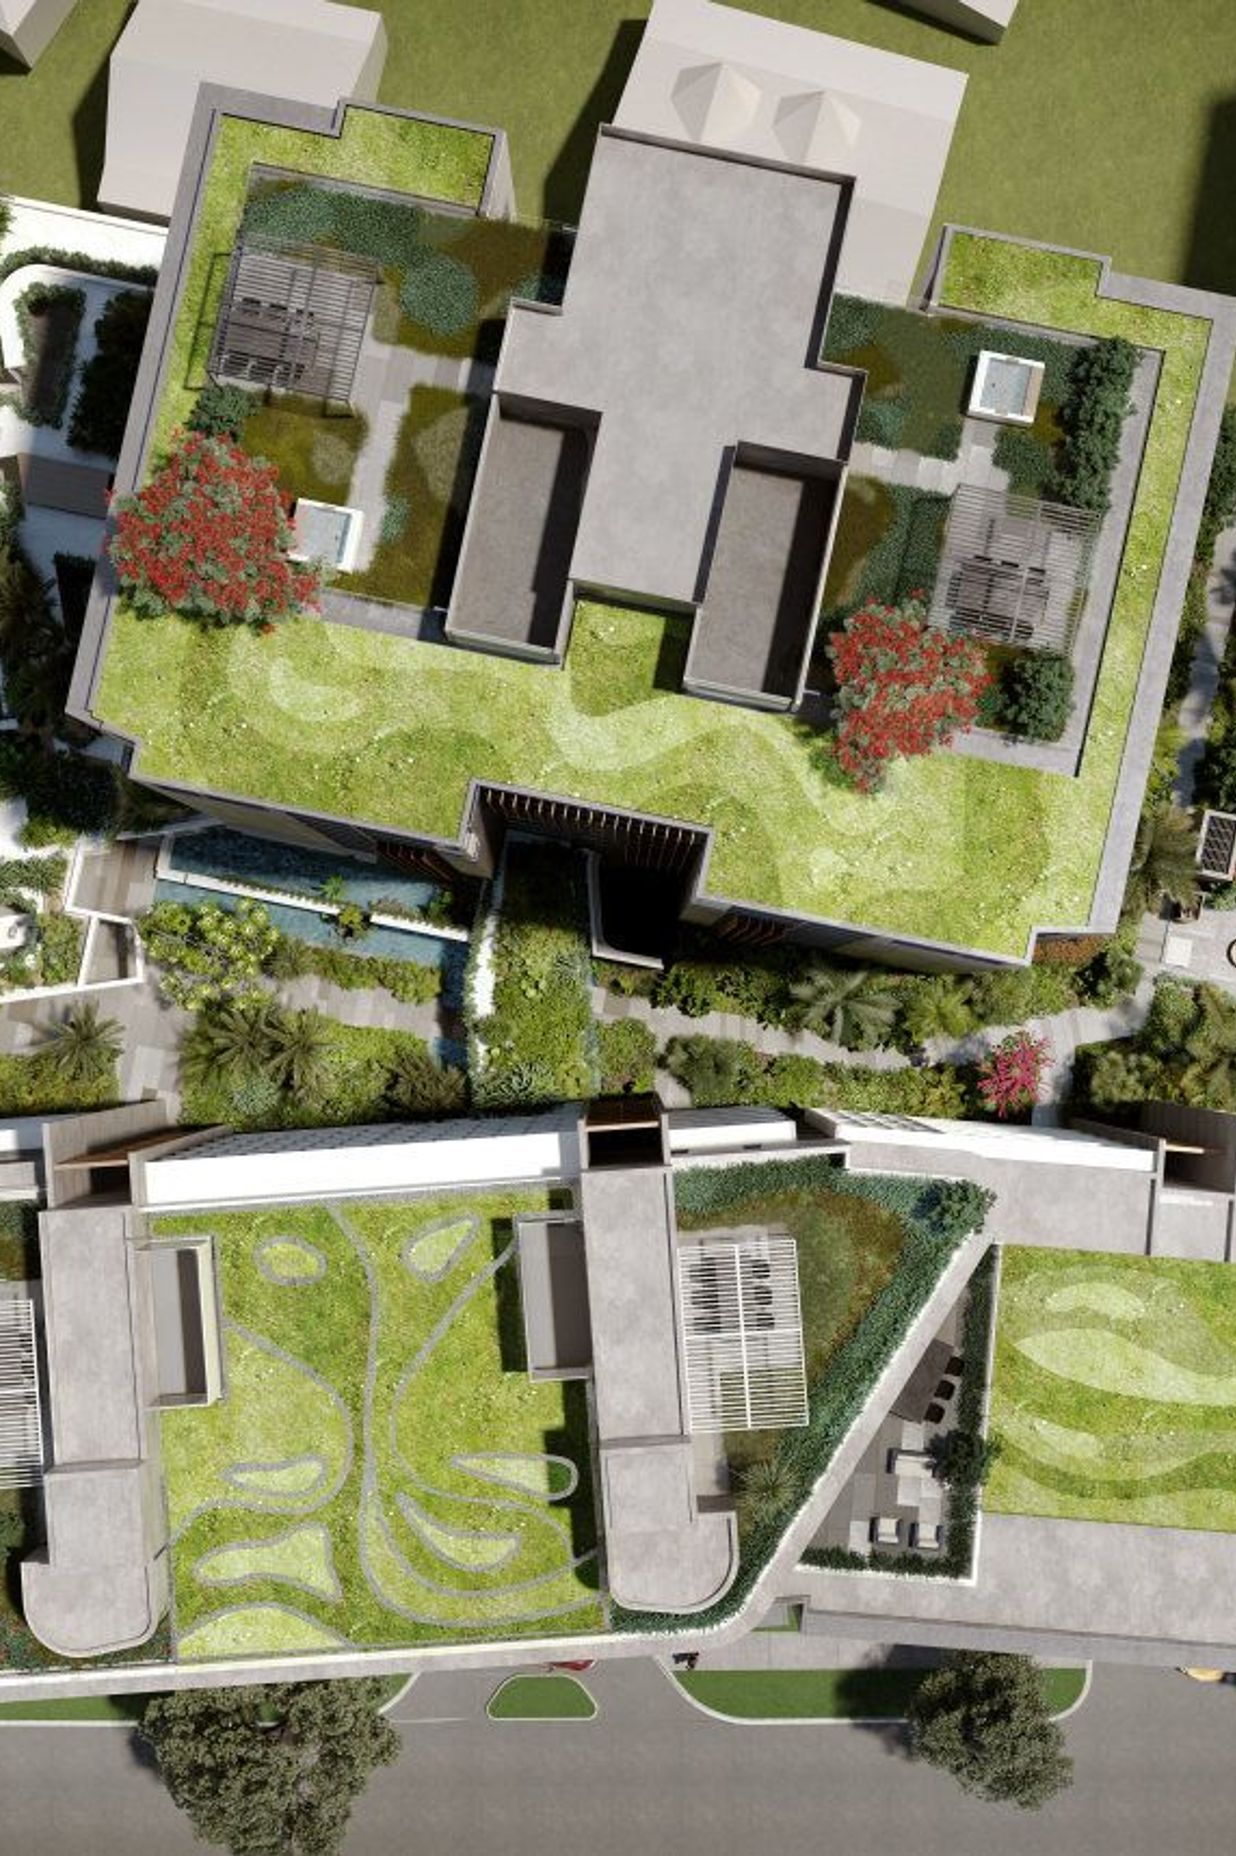 From above, Mark II appears as if a blanket of green has been draped over the buildings. Pohutukawa will be planted on the roofs along with a range of other plants and grasses.